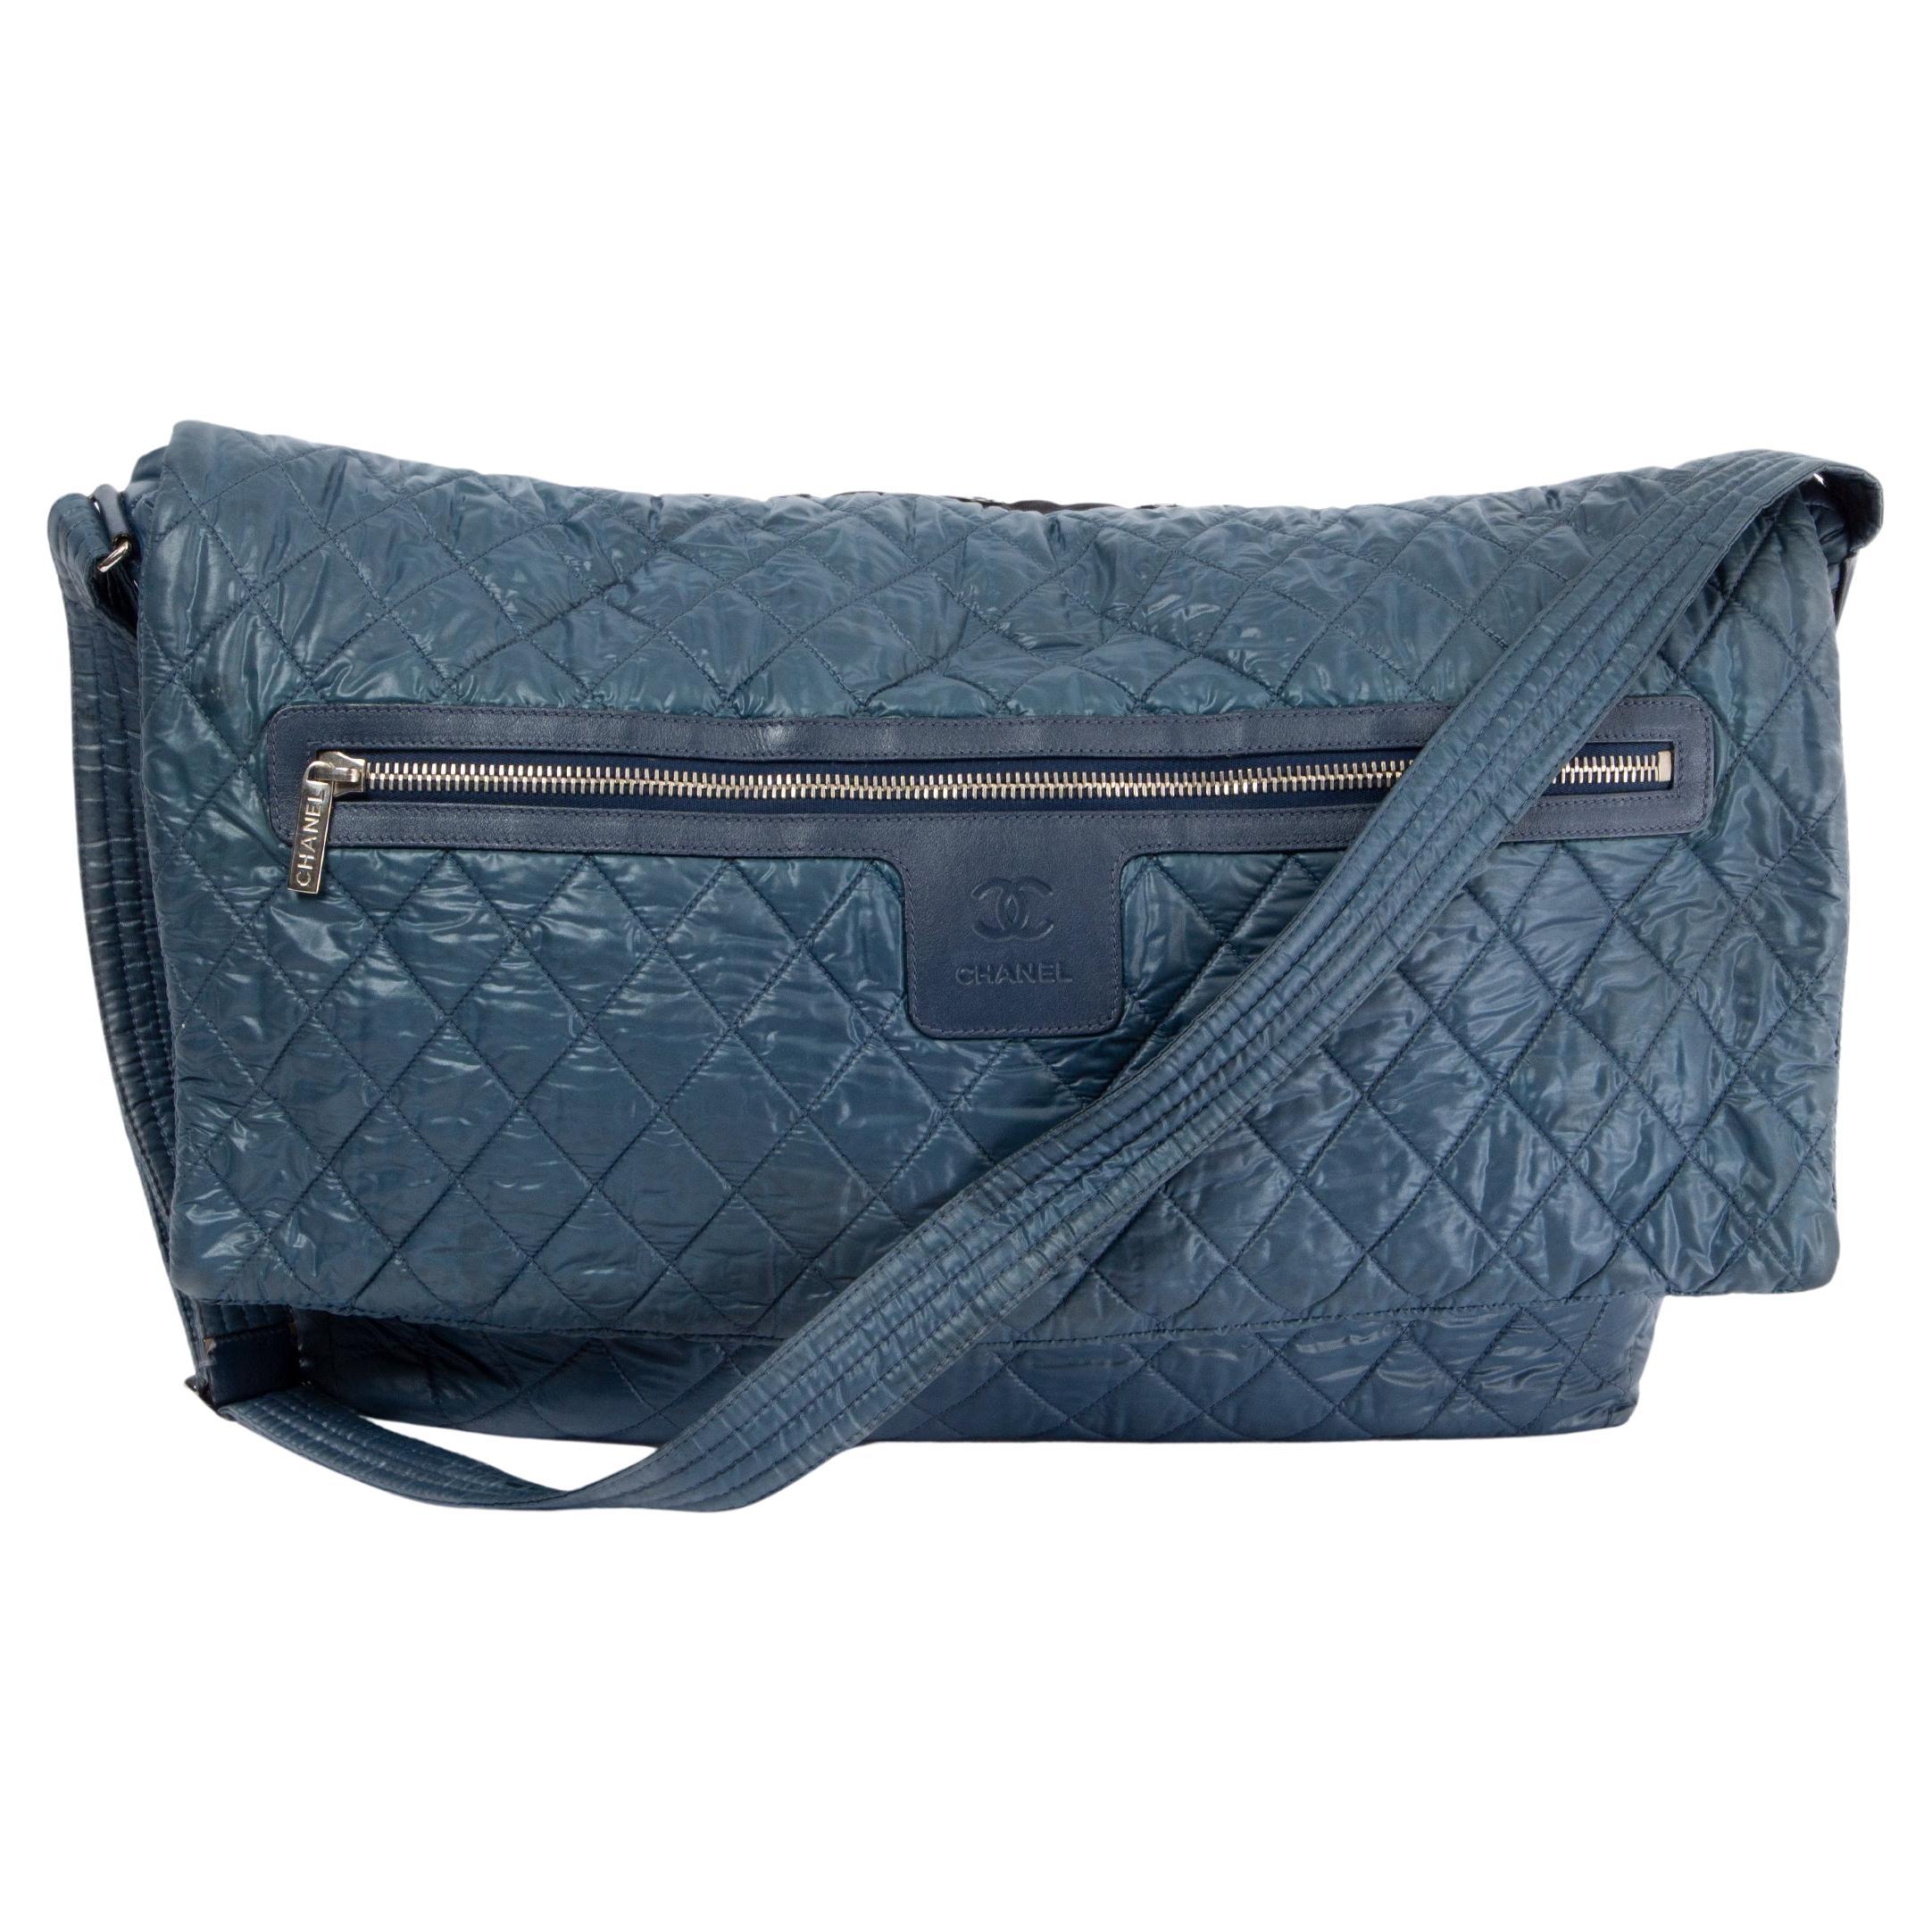 CHANEL petrol blue nylon COCO COCOON LARGE Messenger Bag For Sale